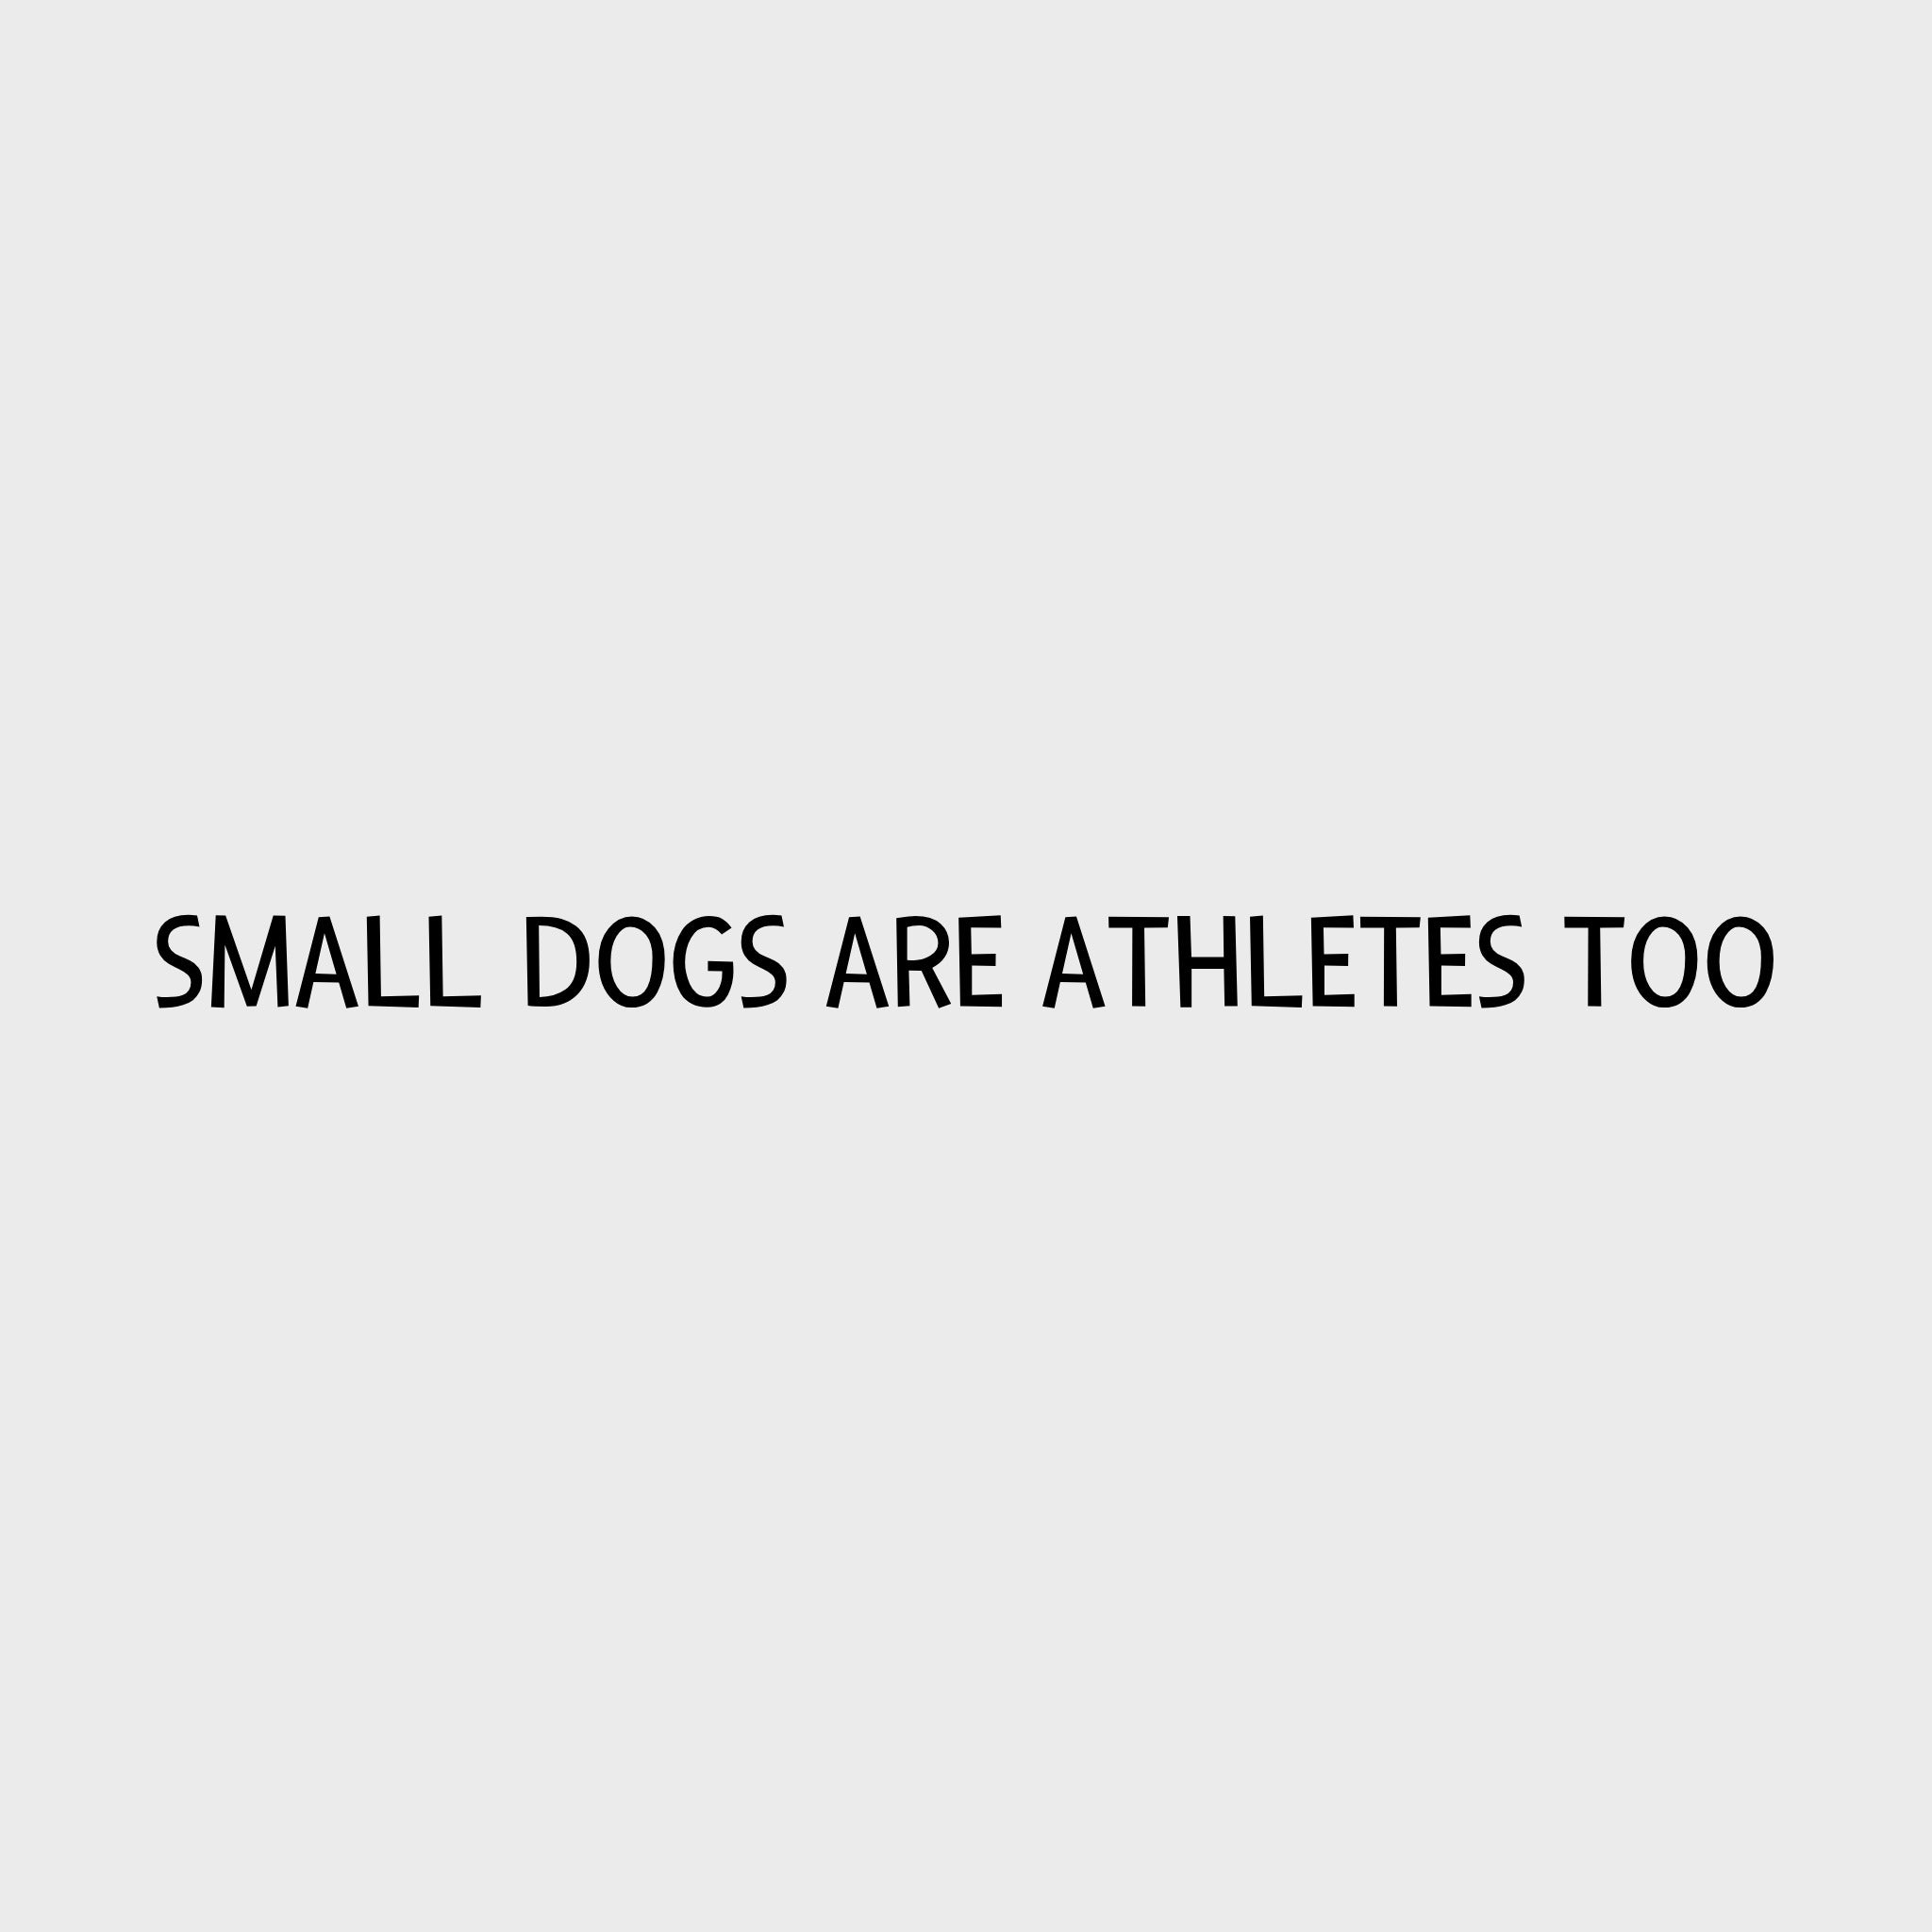 Video - Small dogs are athletes too